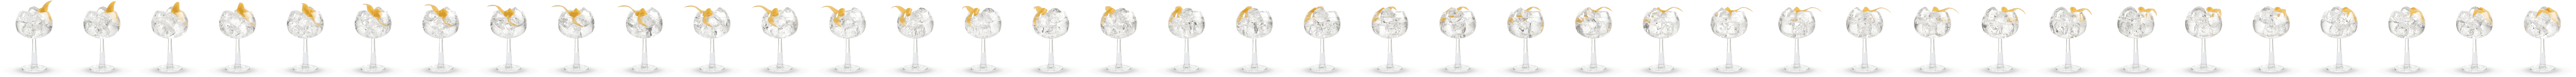 Floral Gin and Tonic